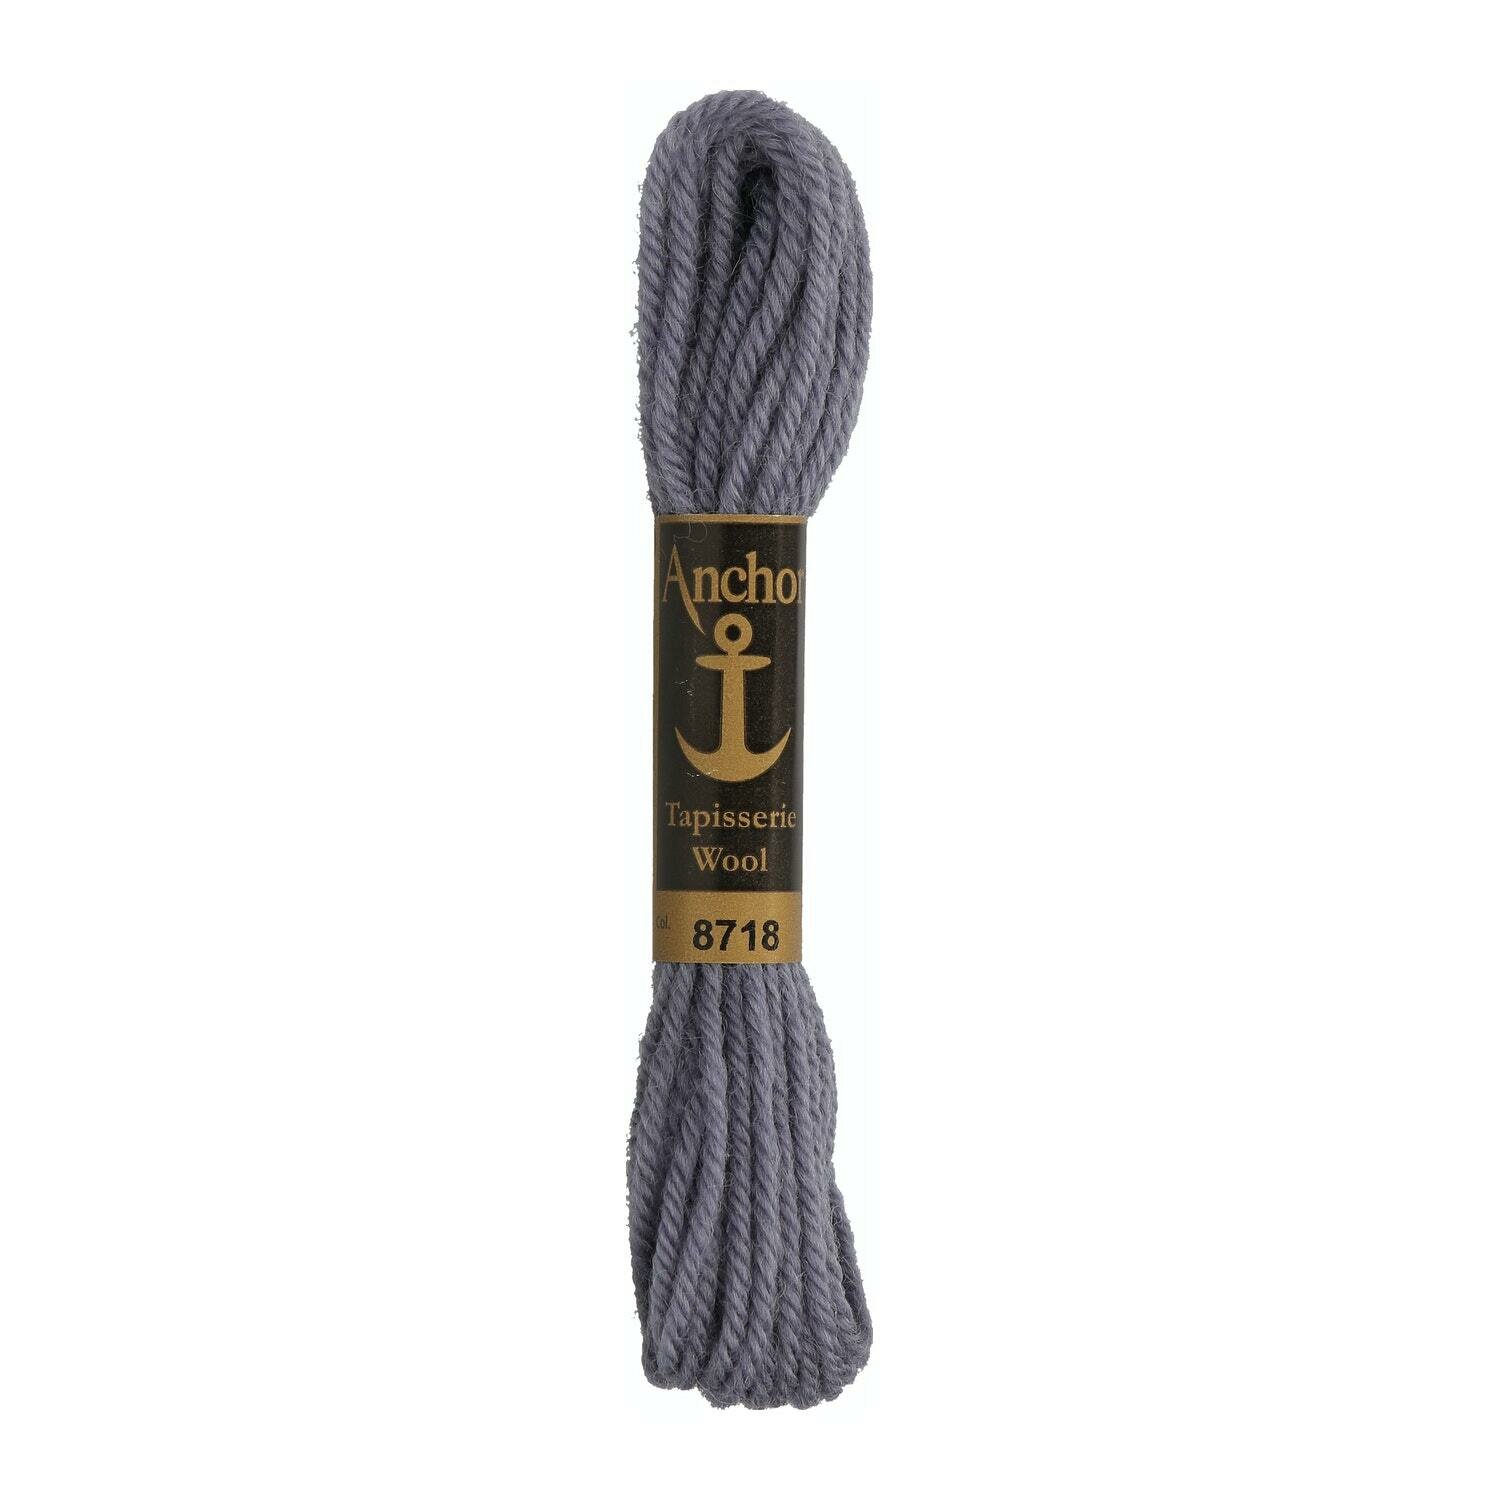 Anchor Tapisserie Wool # 08718